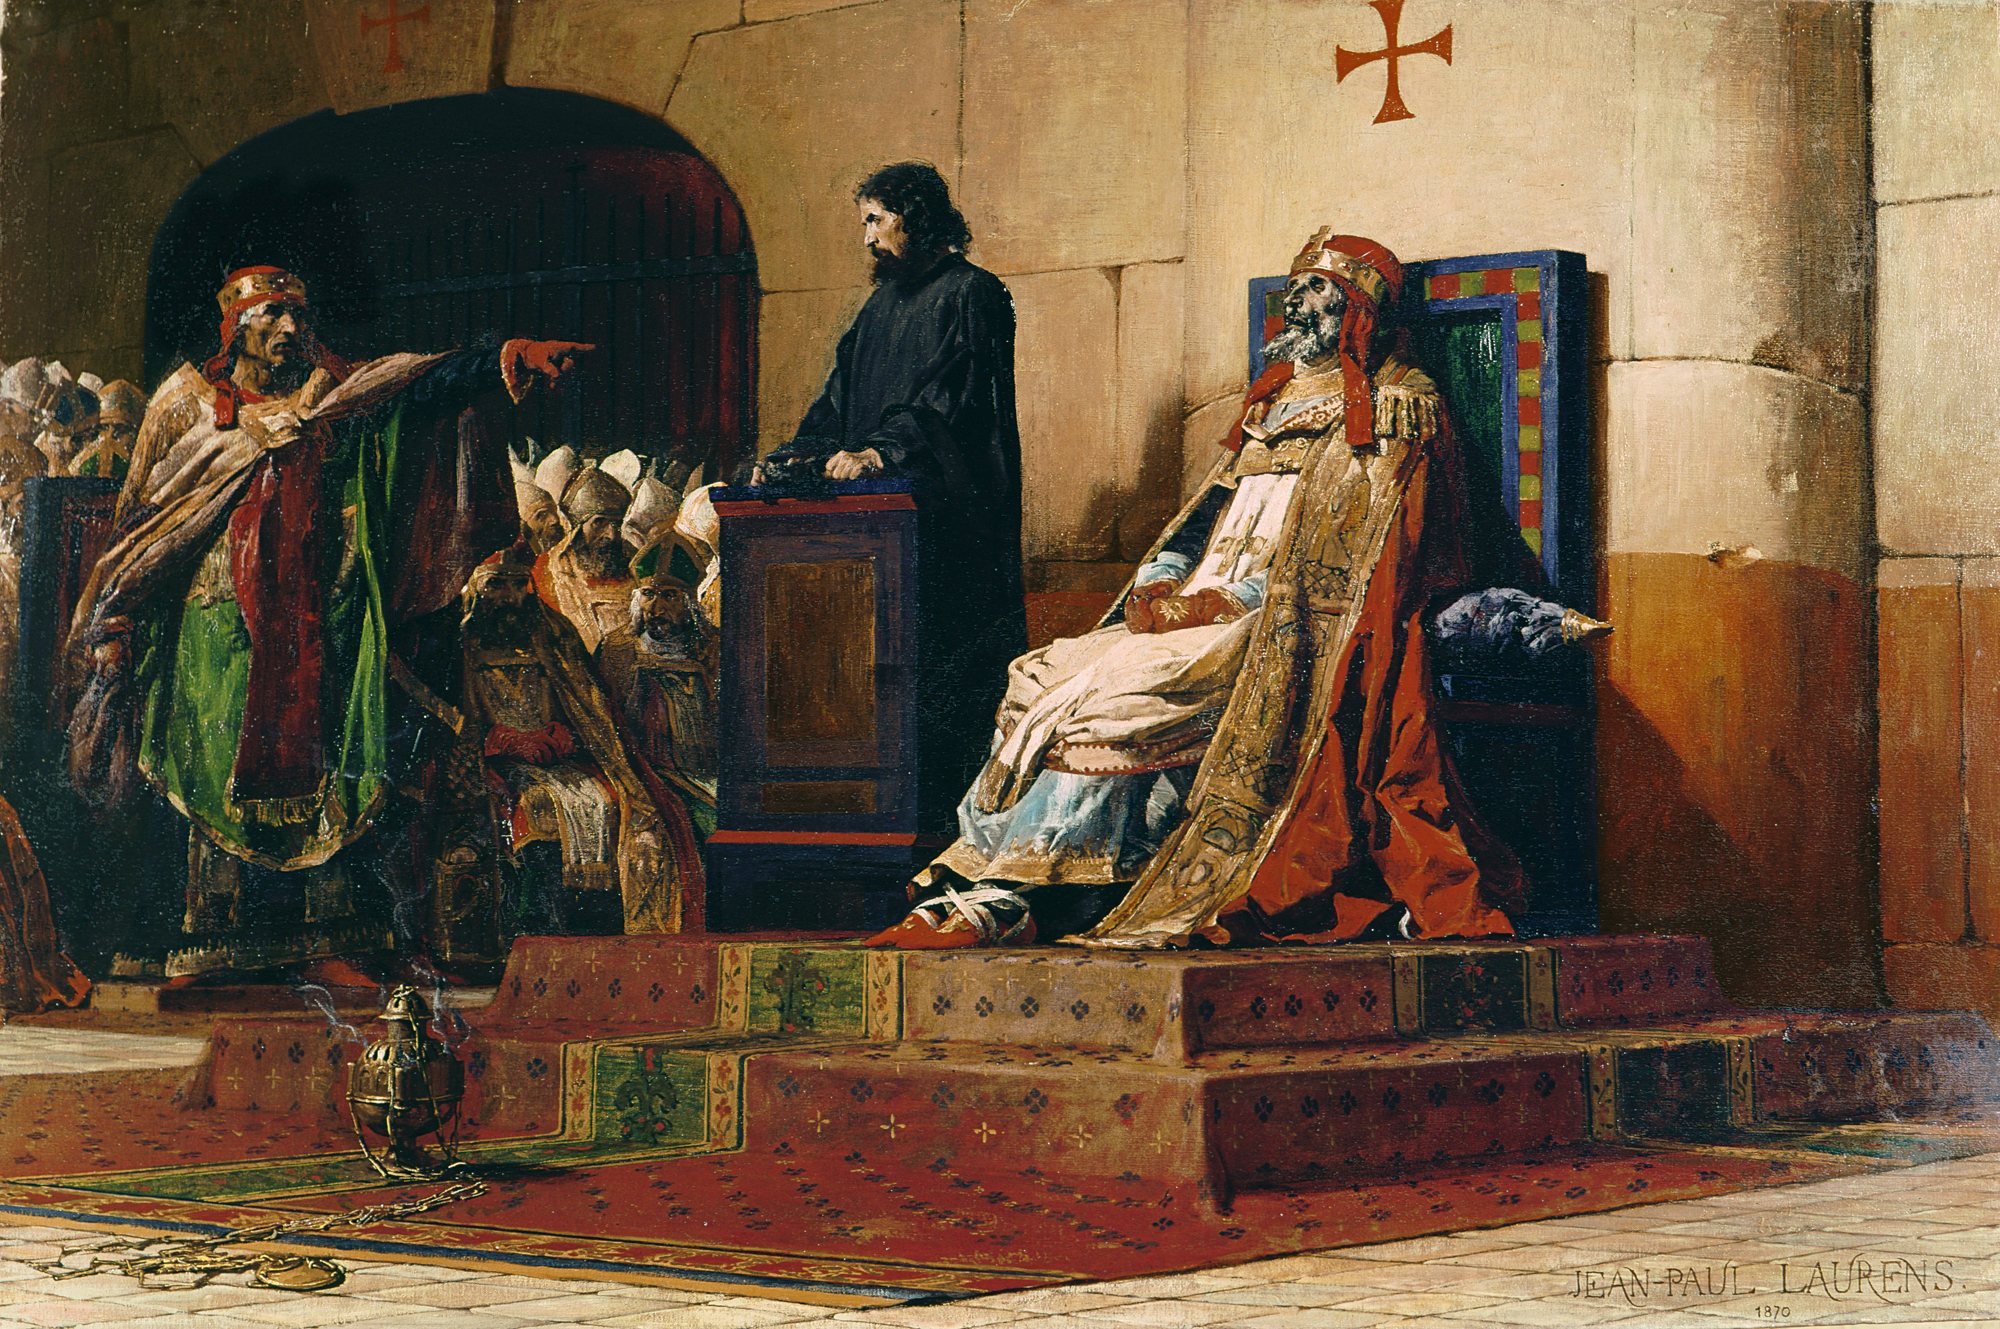 Absurd Historical Events - The Cadaver Synod